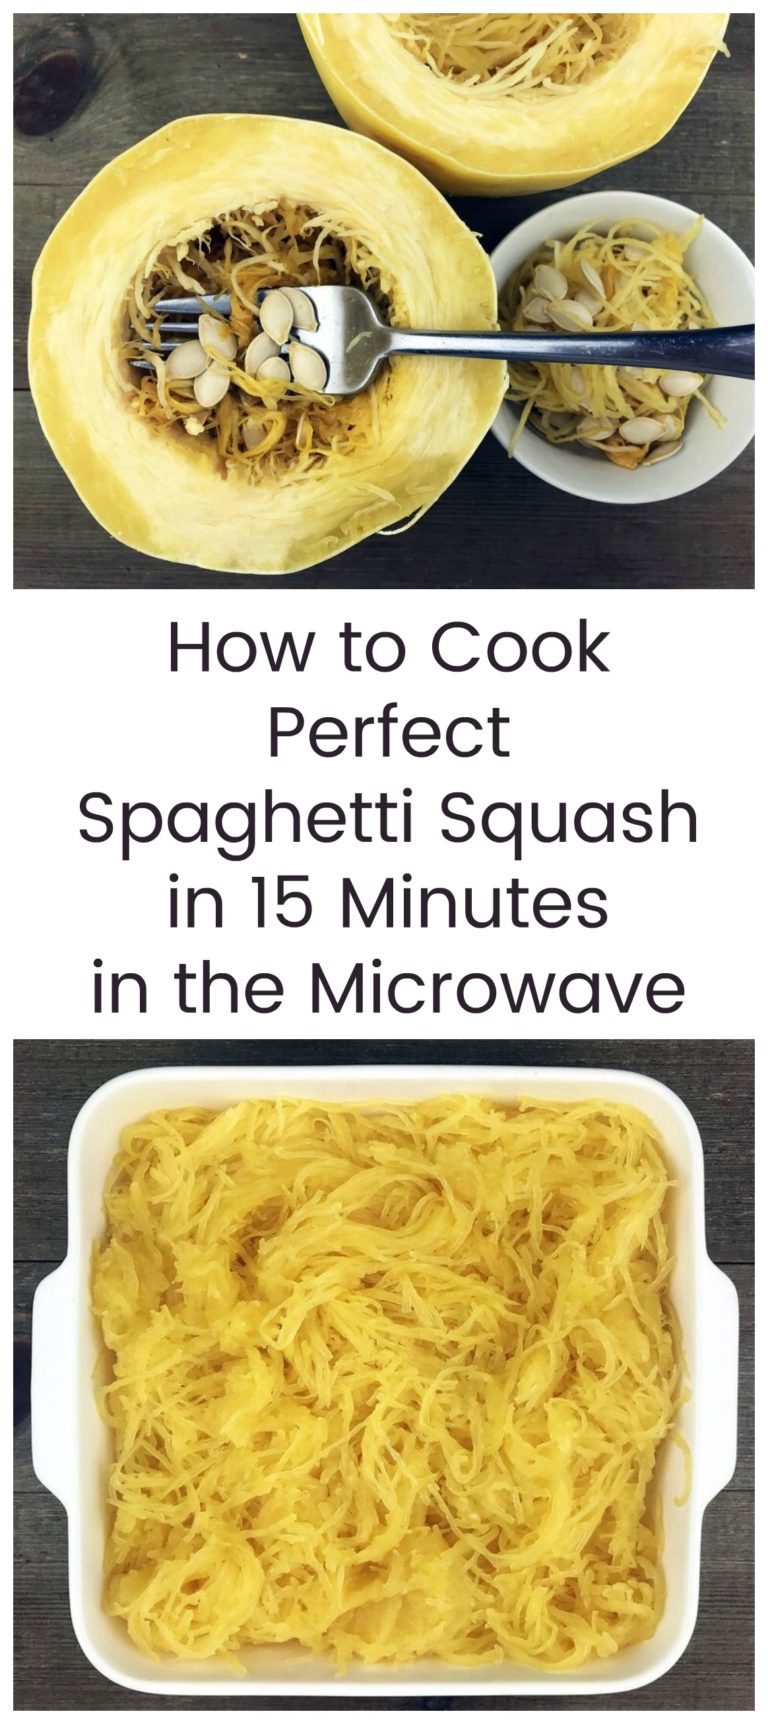 How To Cook Perfect Spaghetti Squash In 15 Minutes In The Microwave Jenny At Dapperhouse 5053